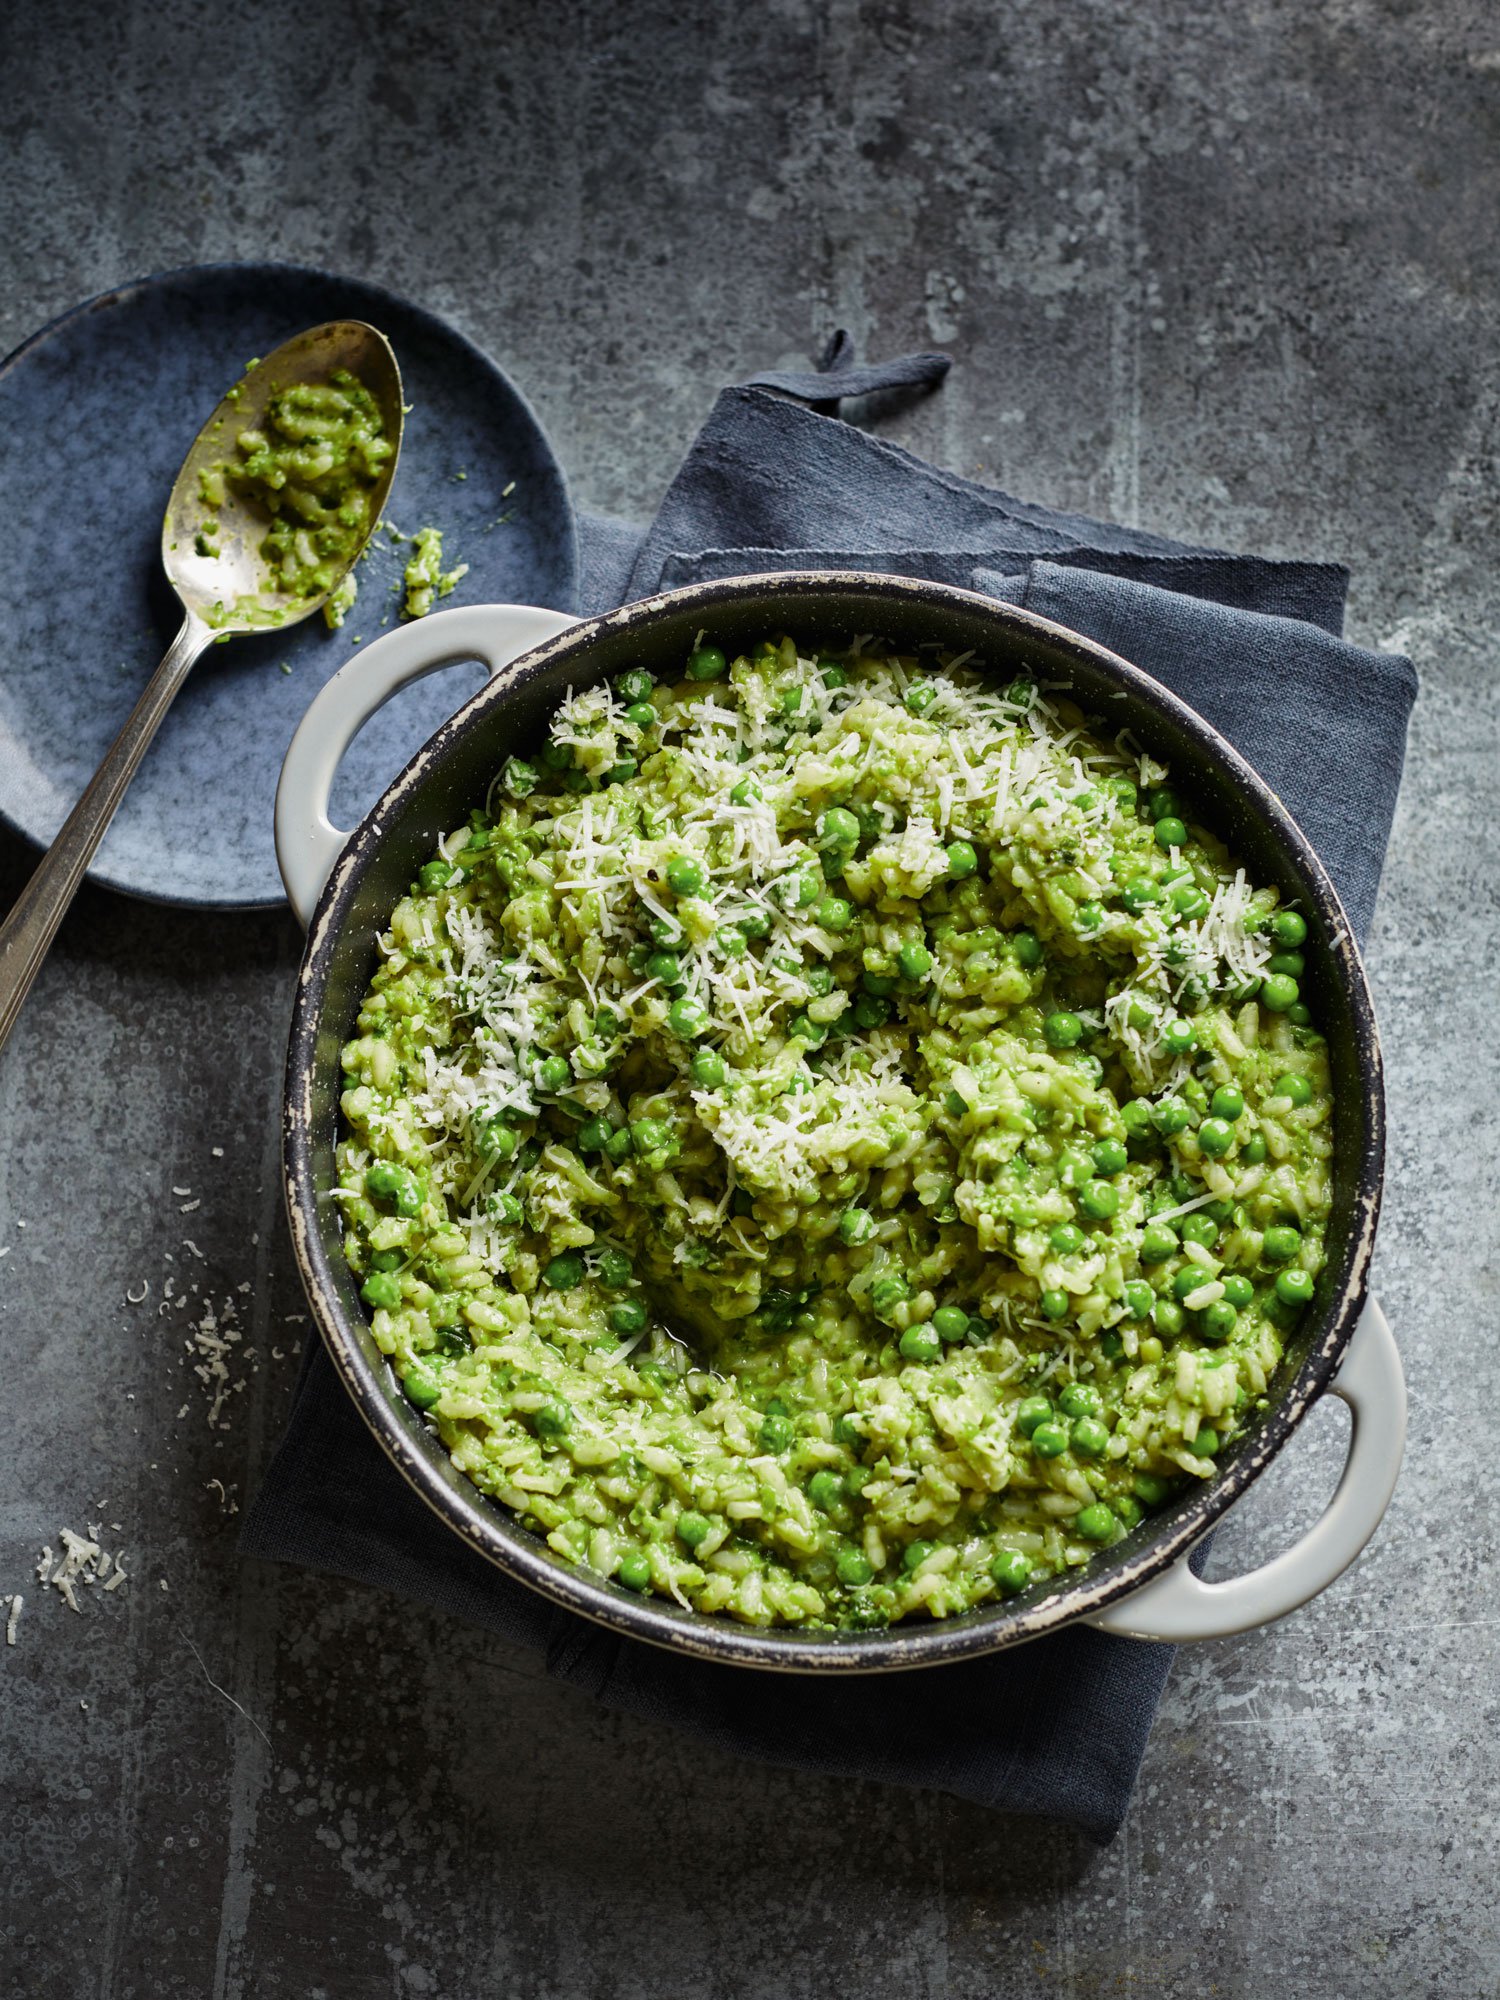 Pea risotto with spinach